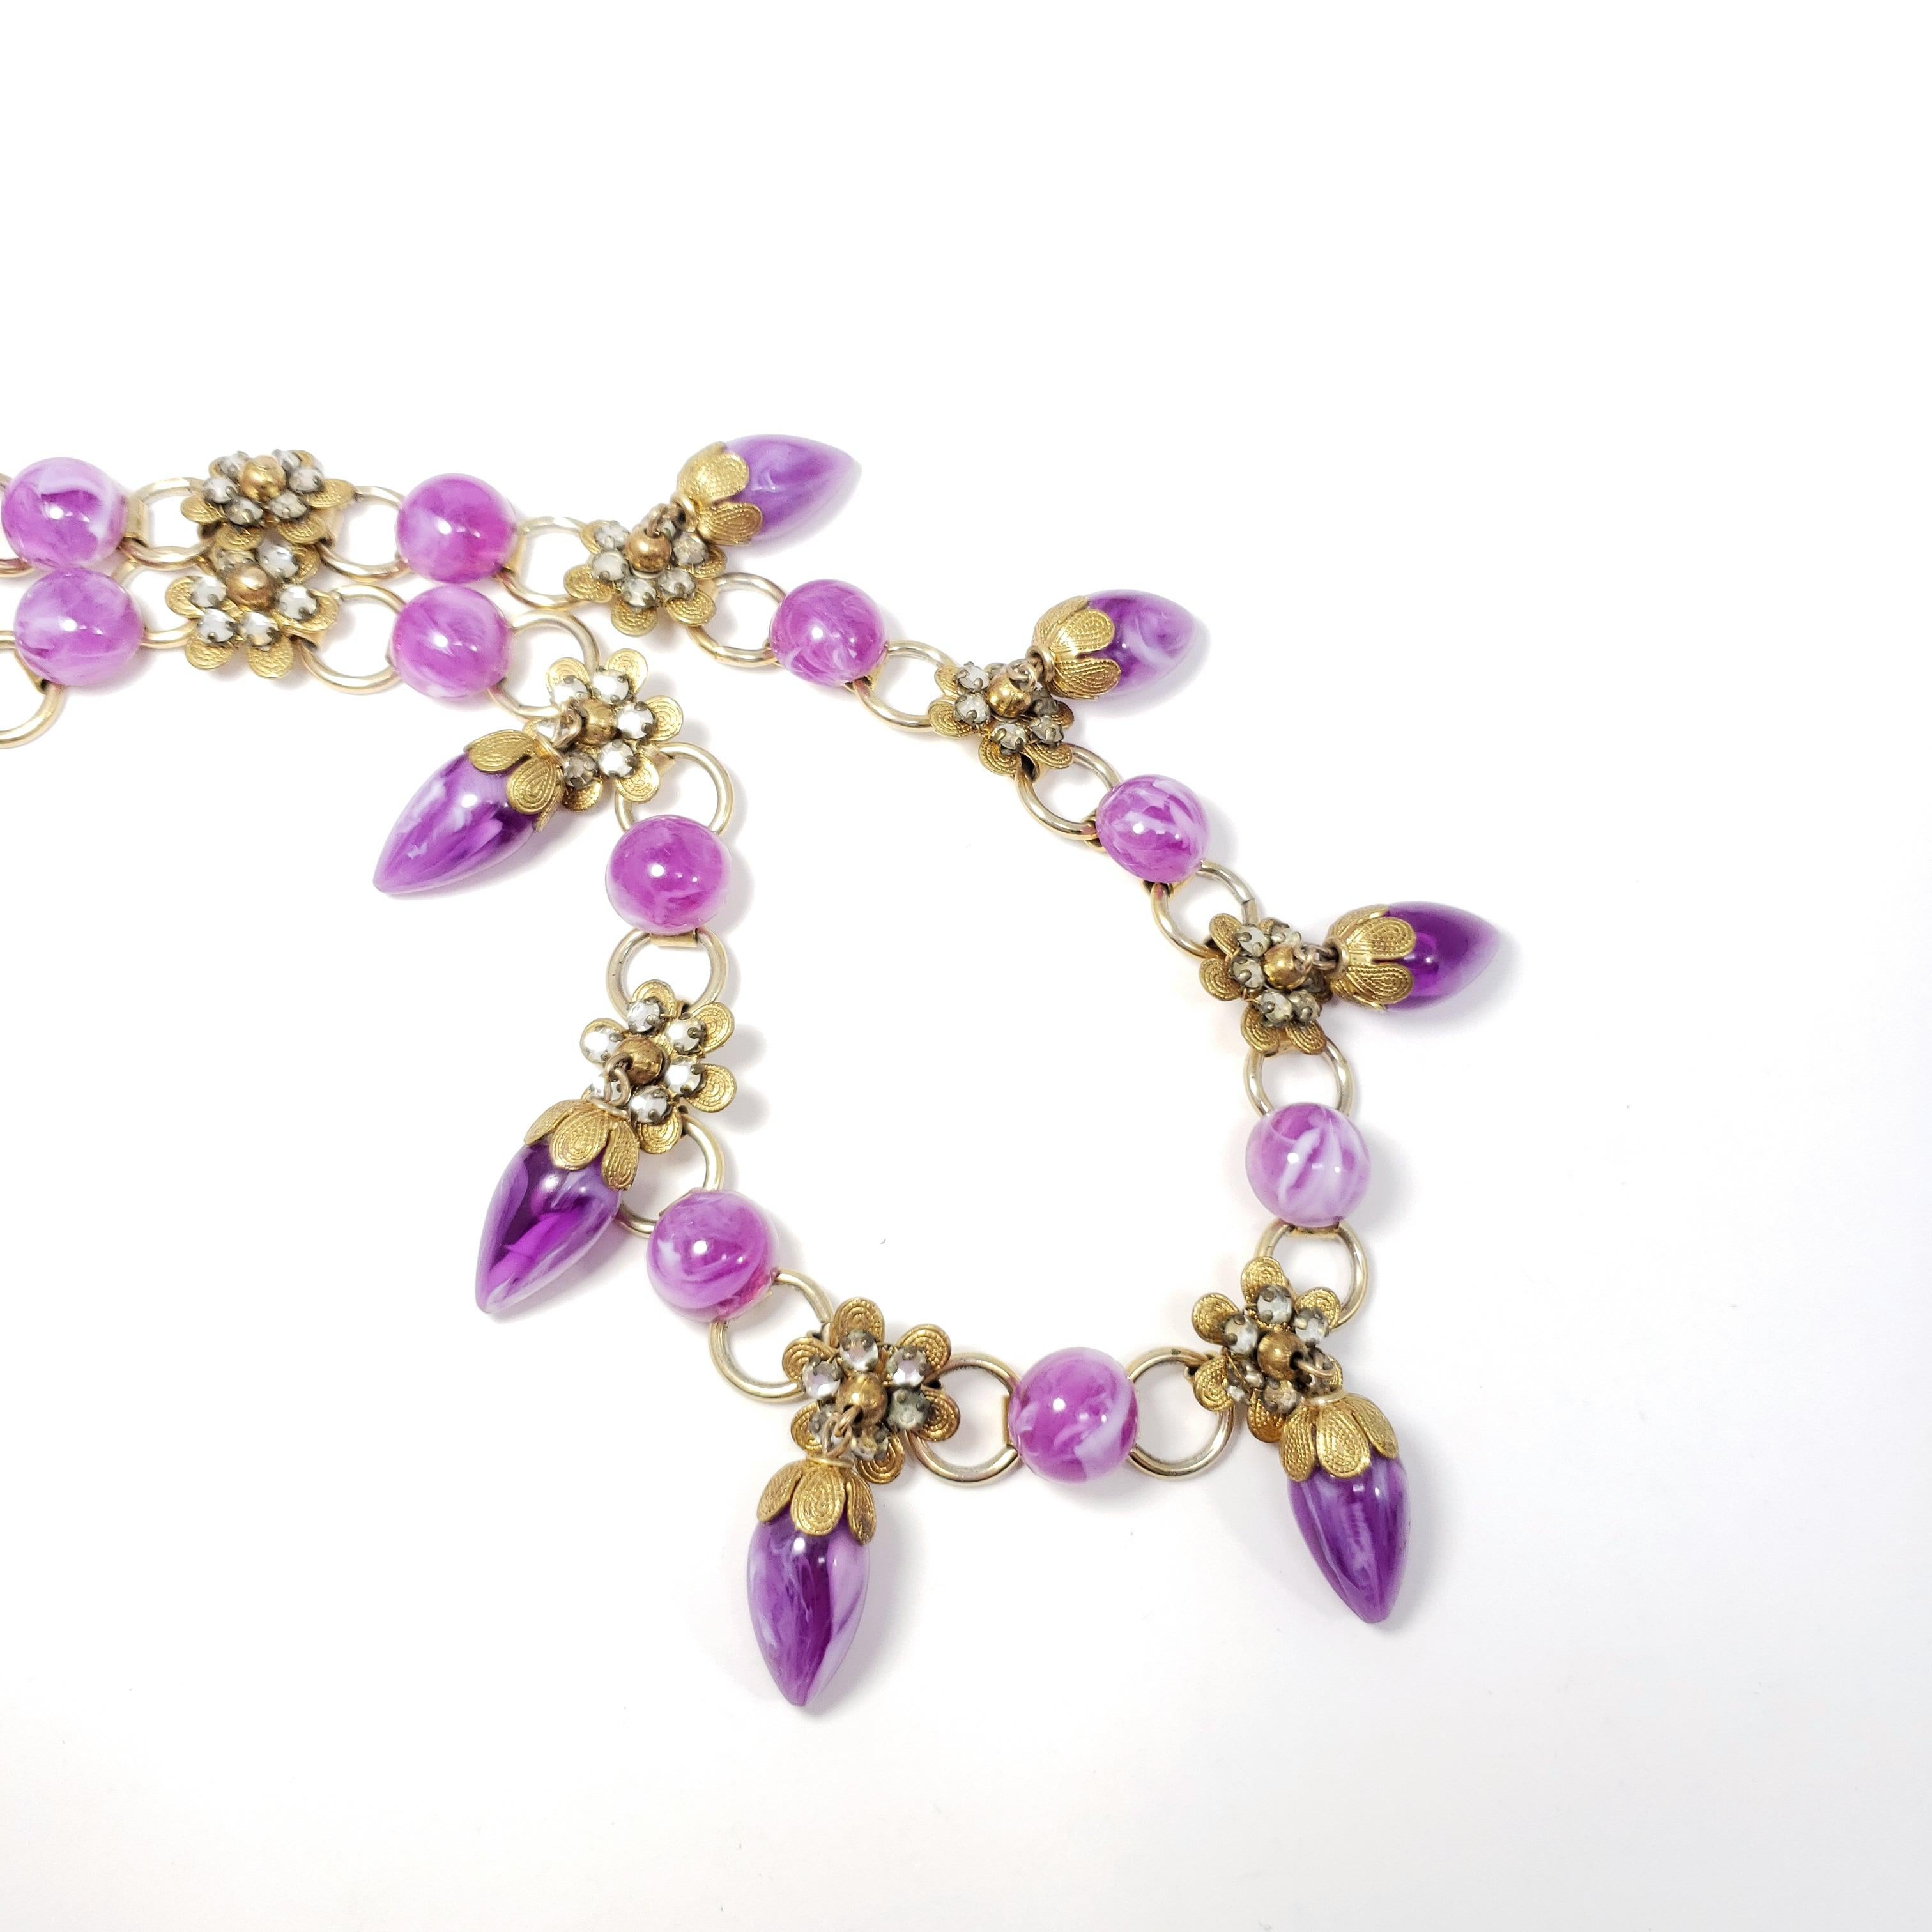 Retro Marbled Violet Dangling Crystal Flower Necklace, Gold In Excellent Condition For Sale In Milford, DE